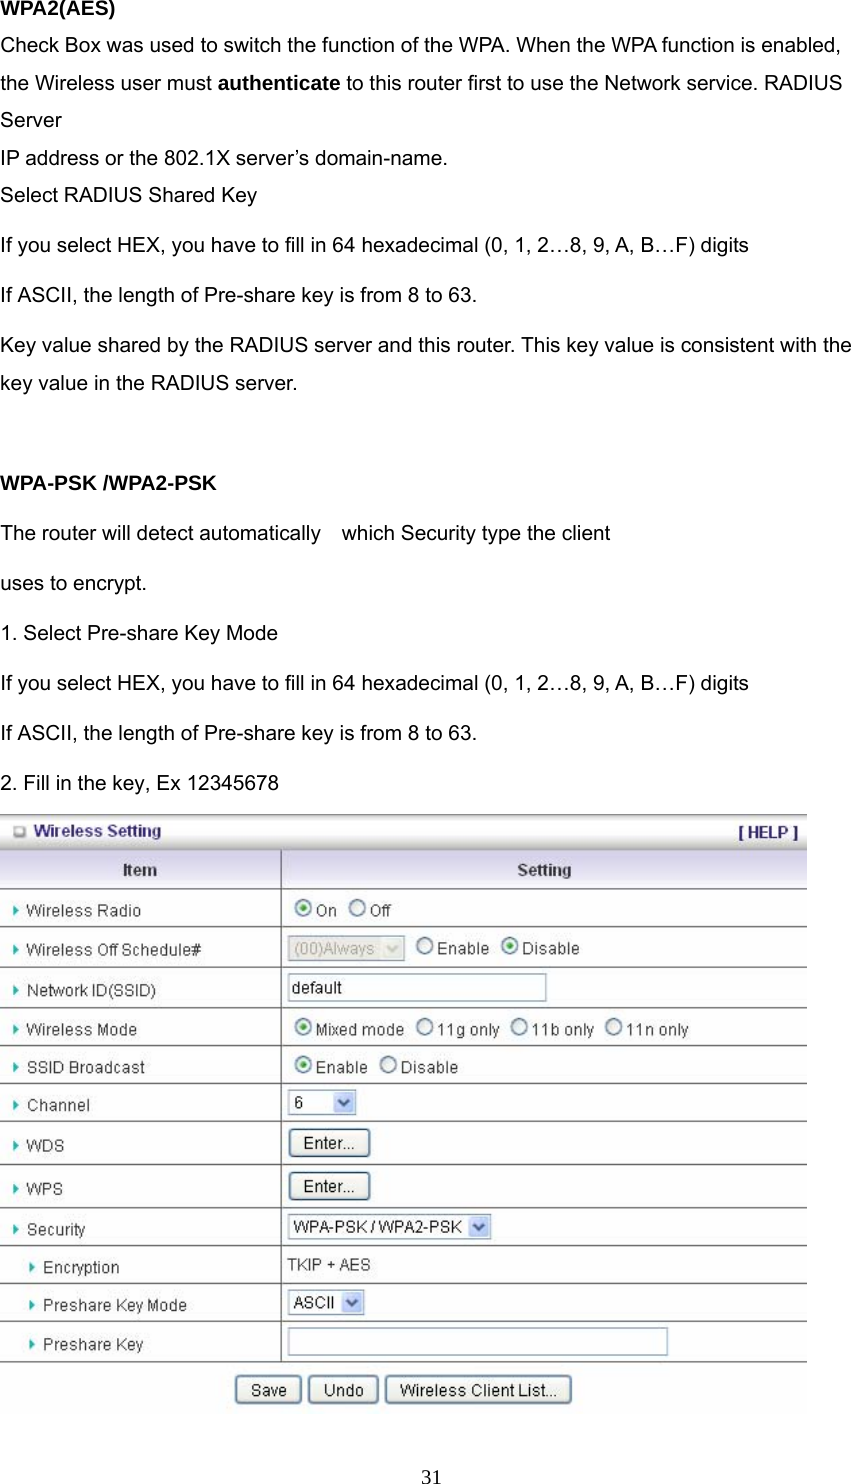  31WPA2(AES) Check Box was used to switch the function of the WPA. When the WPA function is enabled, the Wireless user must authenticate to this router first to use the Network service. RADIUS Server IP address or the 802.1X server’s domain-name.   Select RADIUS Shared Key If you select HEX, you have to fill in 64 hexadecimal (0, 1, 2…8, 9, A, B…F) digits If ASCII, the length of Pre-share key is from 8 to 63. Key value shared by the RADIUS server and this router. This key value is consistent with the key value in the RADIUS server.  WPA-PSK /WPA2-PSK The router will detect automatically    which Security type the client   uses to encrypt. 1. Select Pre-share Key Mode If you select HEX, you have to fill in 64 hexadecimal (0, 1, 2…8, 9, A, B…F) digits If ASCII, the length of Pre-share key is from 8 to 63. 2. Fill in the key, Ex 12345678  